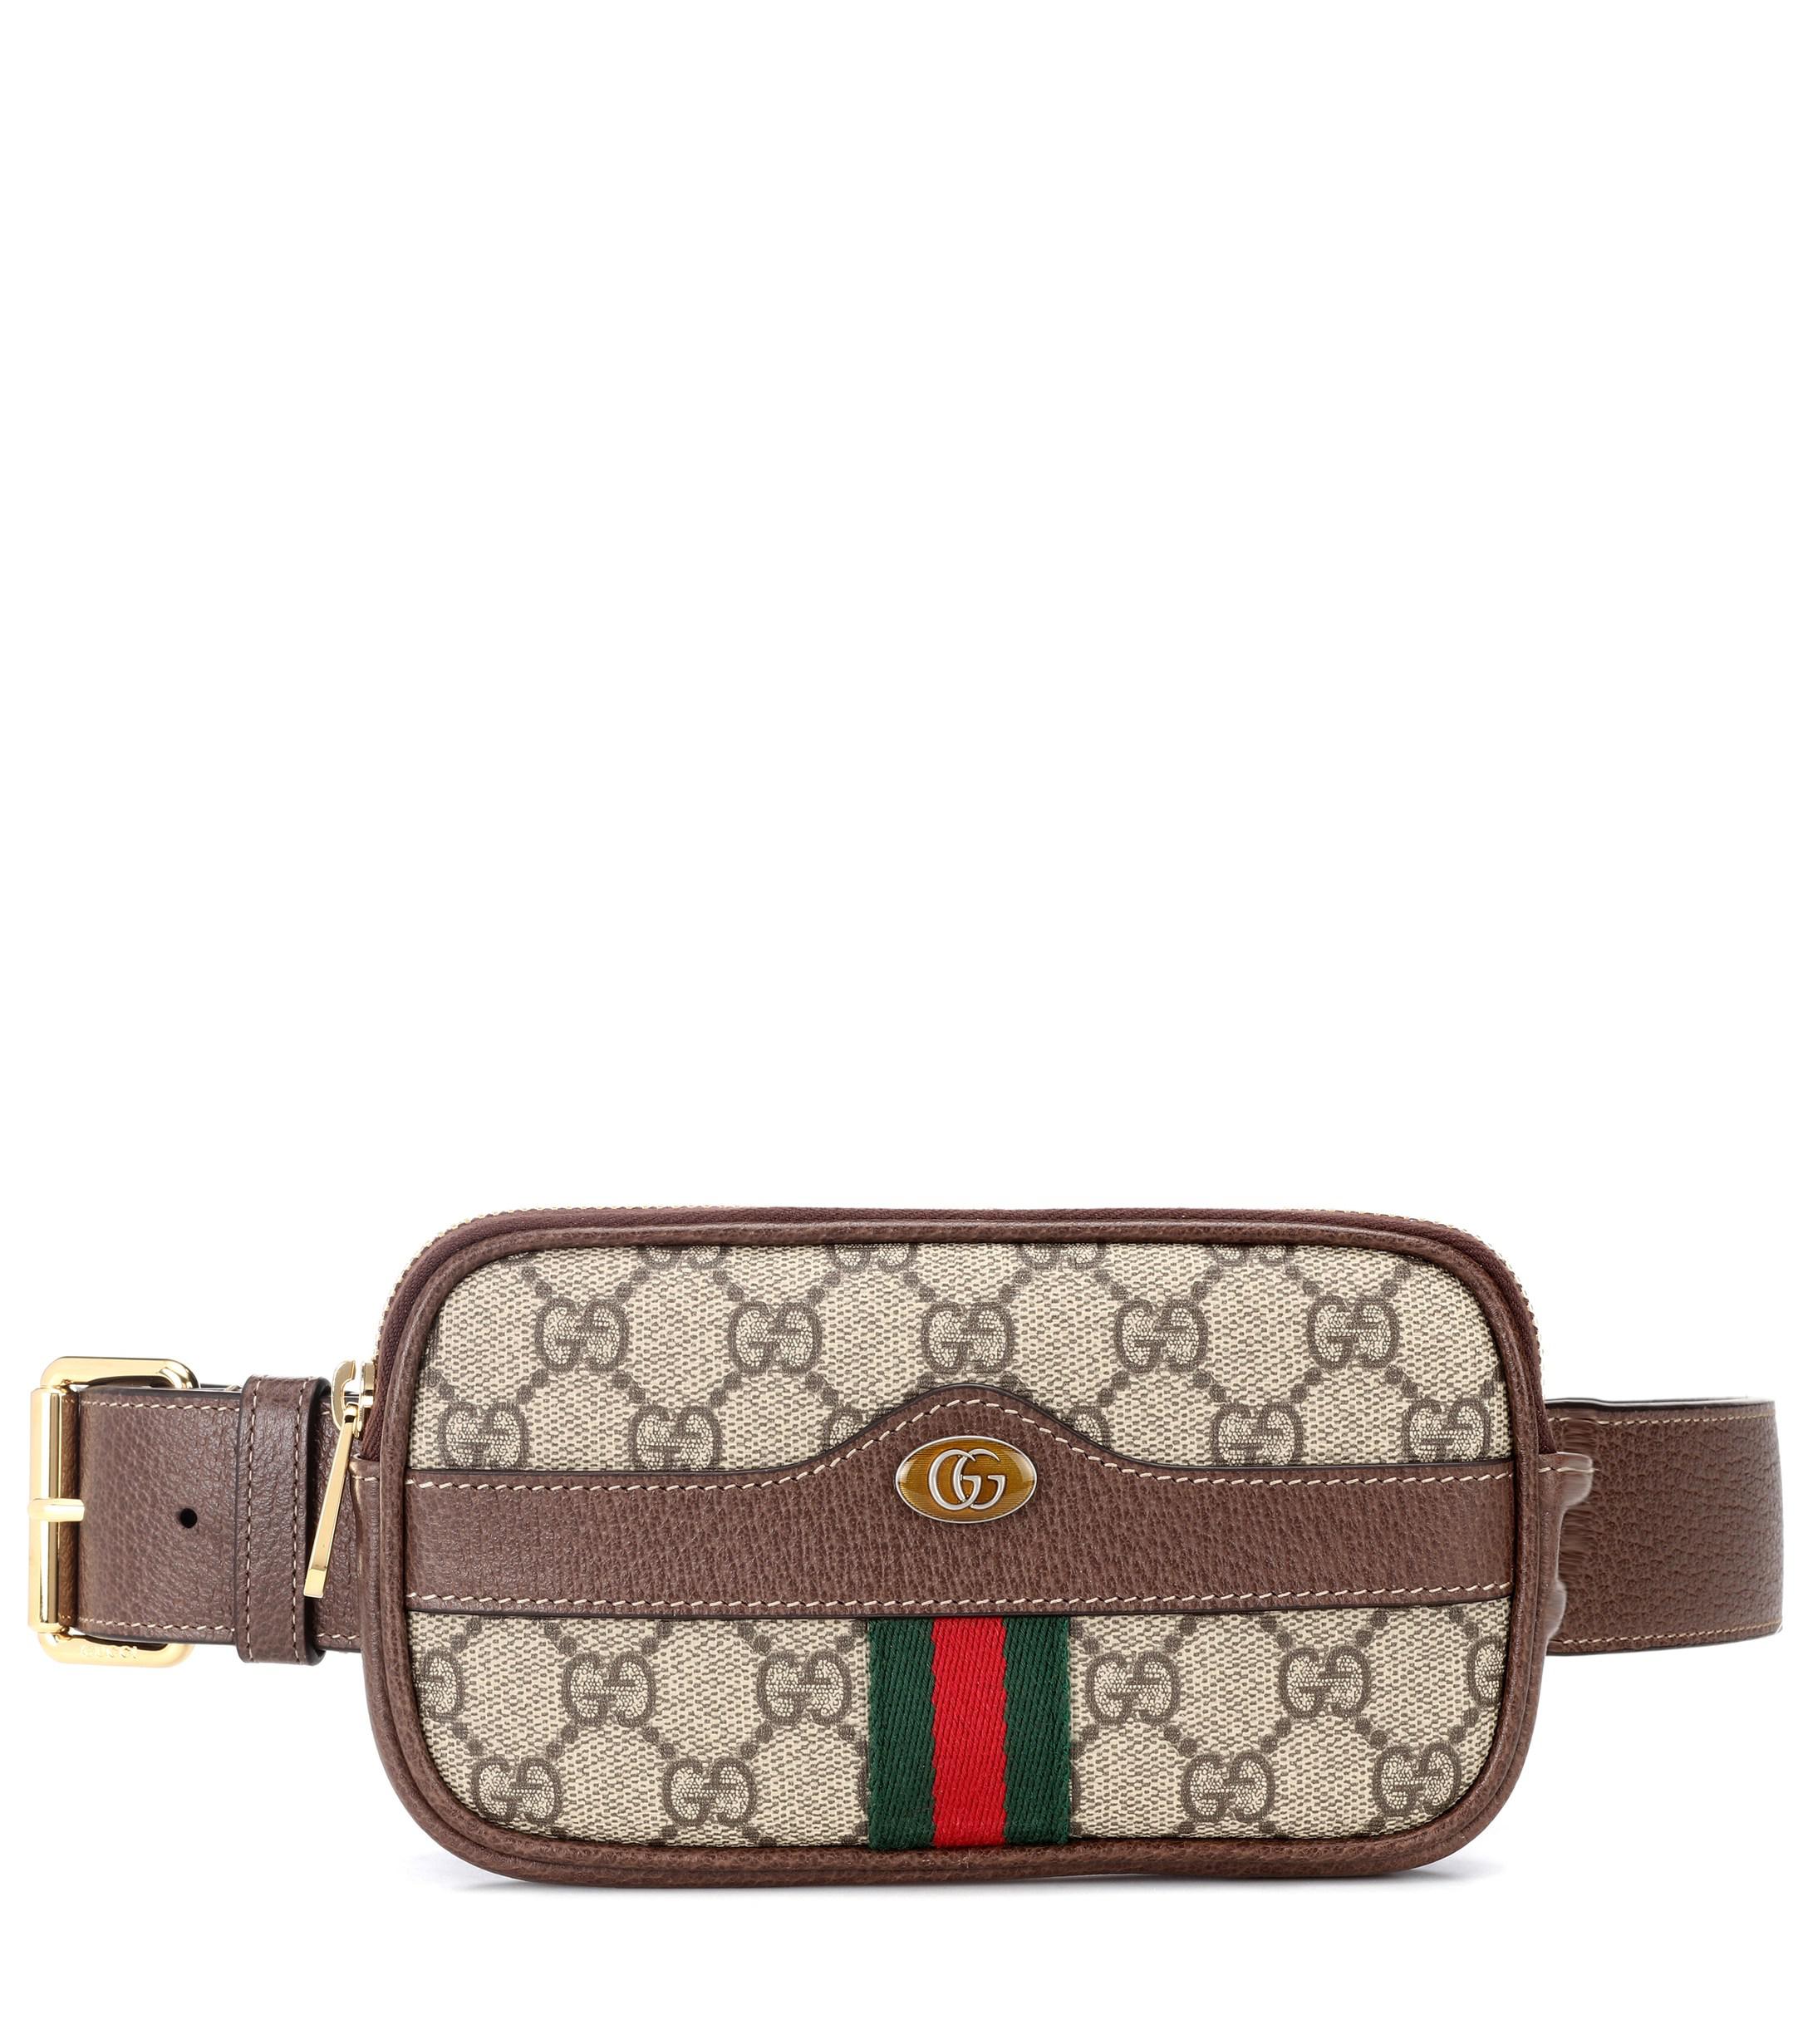 Lyst - Gucci Ophidia GG Supreme Belt Bag in Brown